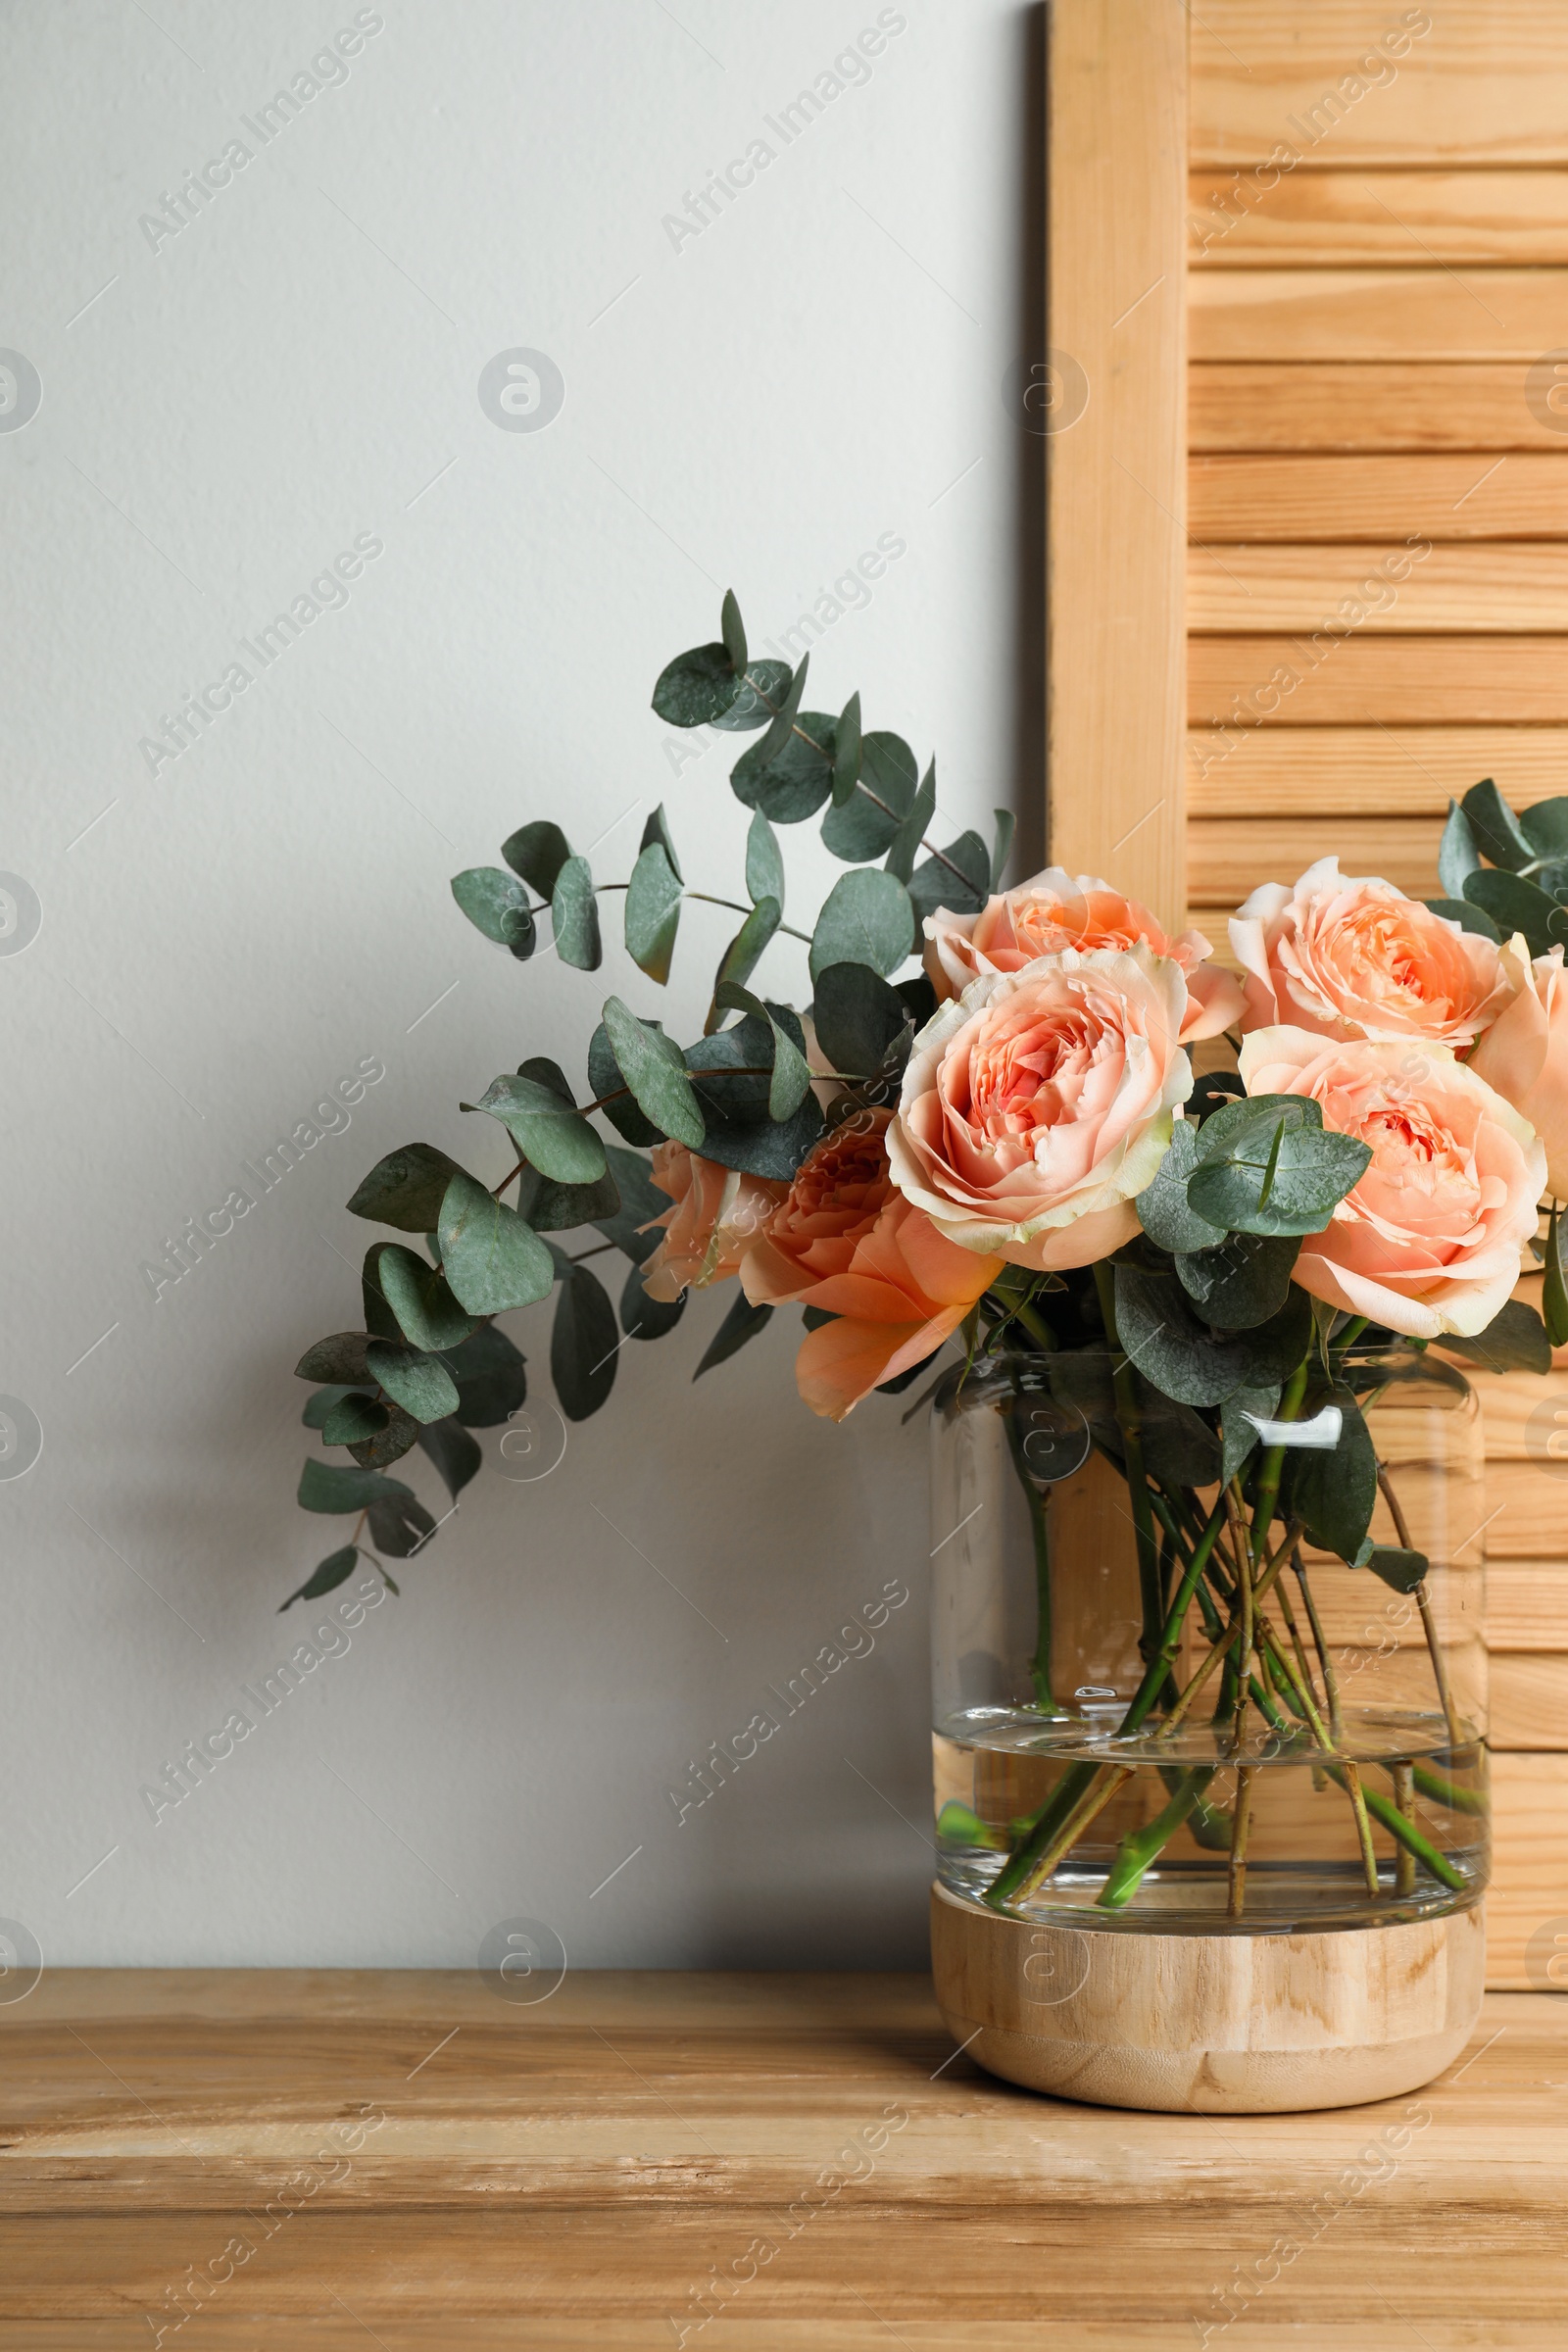 Photo of Bouquet with beautiful flowers in glass vase on wooden table